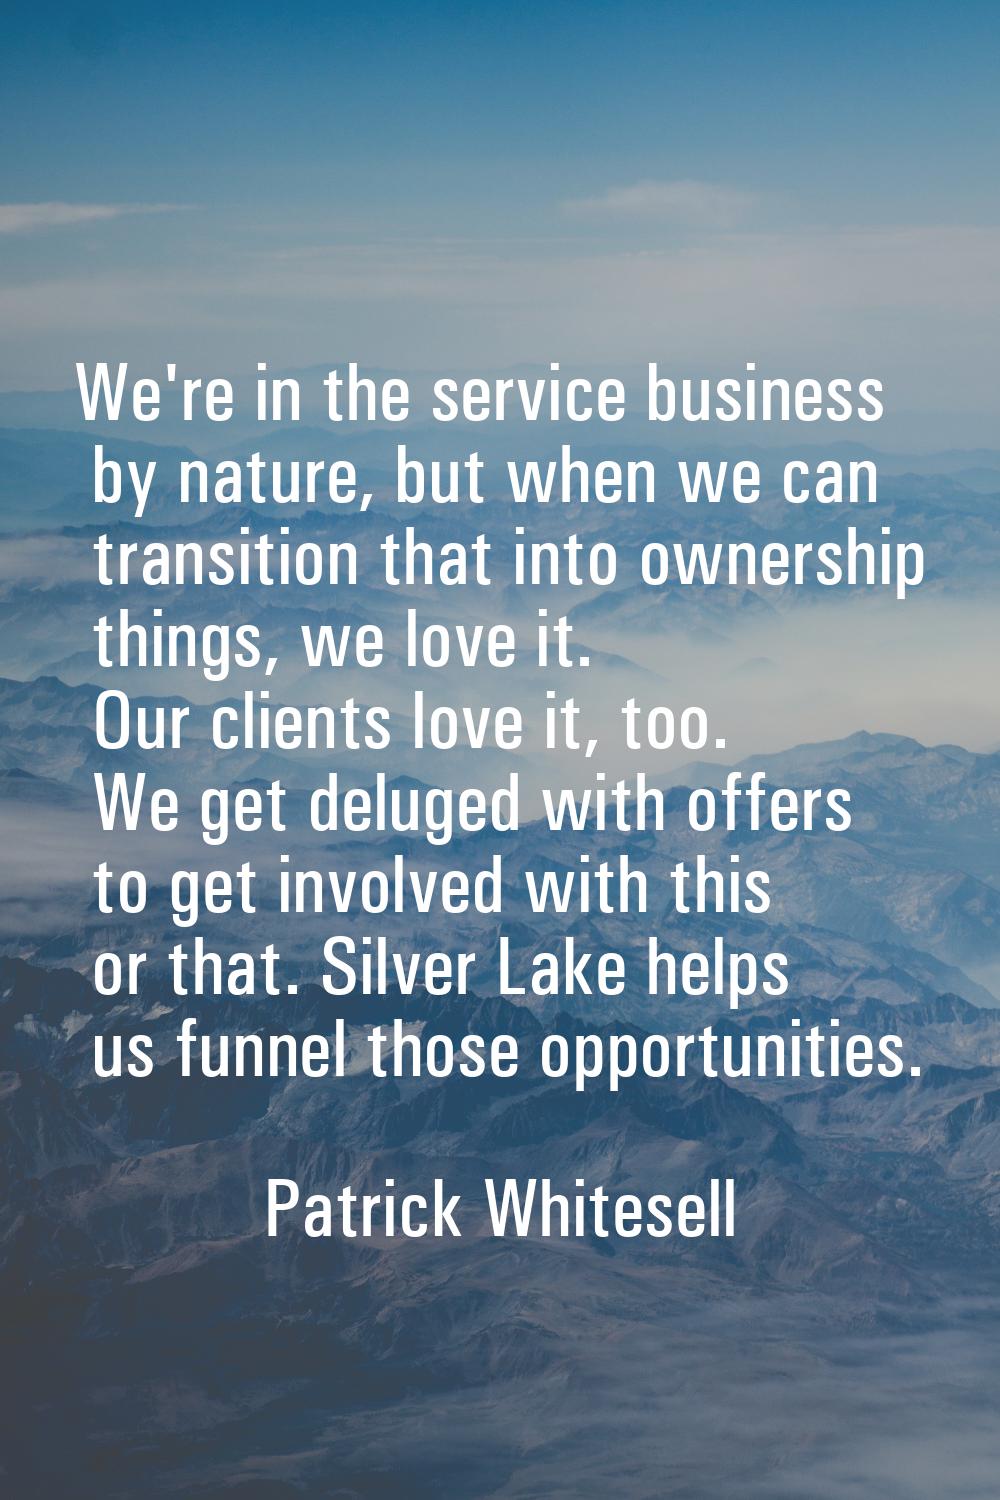 We're in the service business by nature, but when we can transition that into ownership things, we 